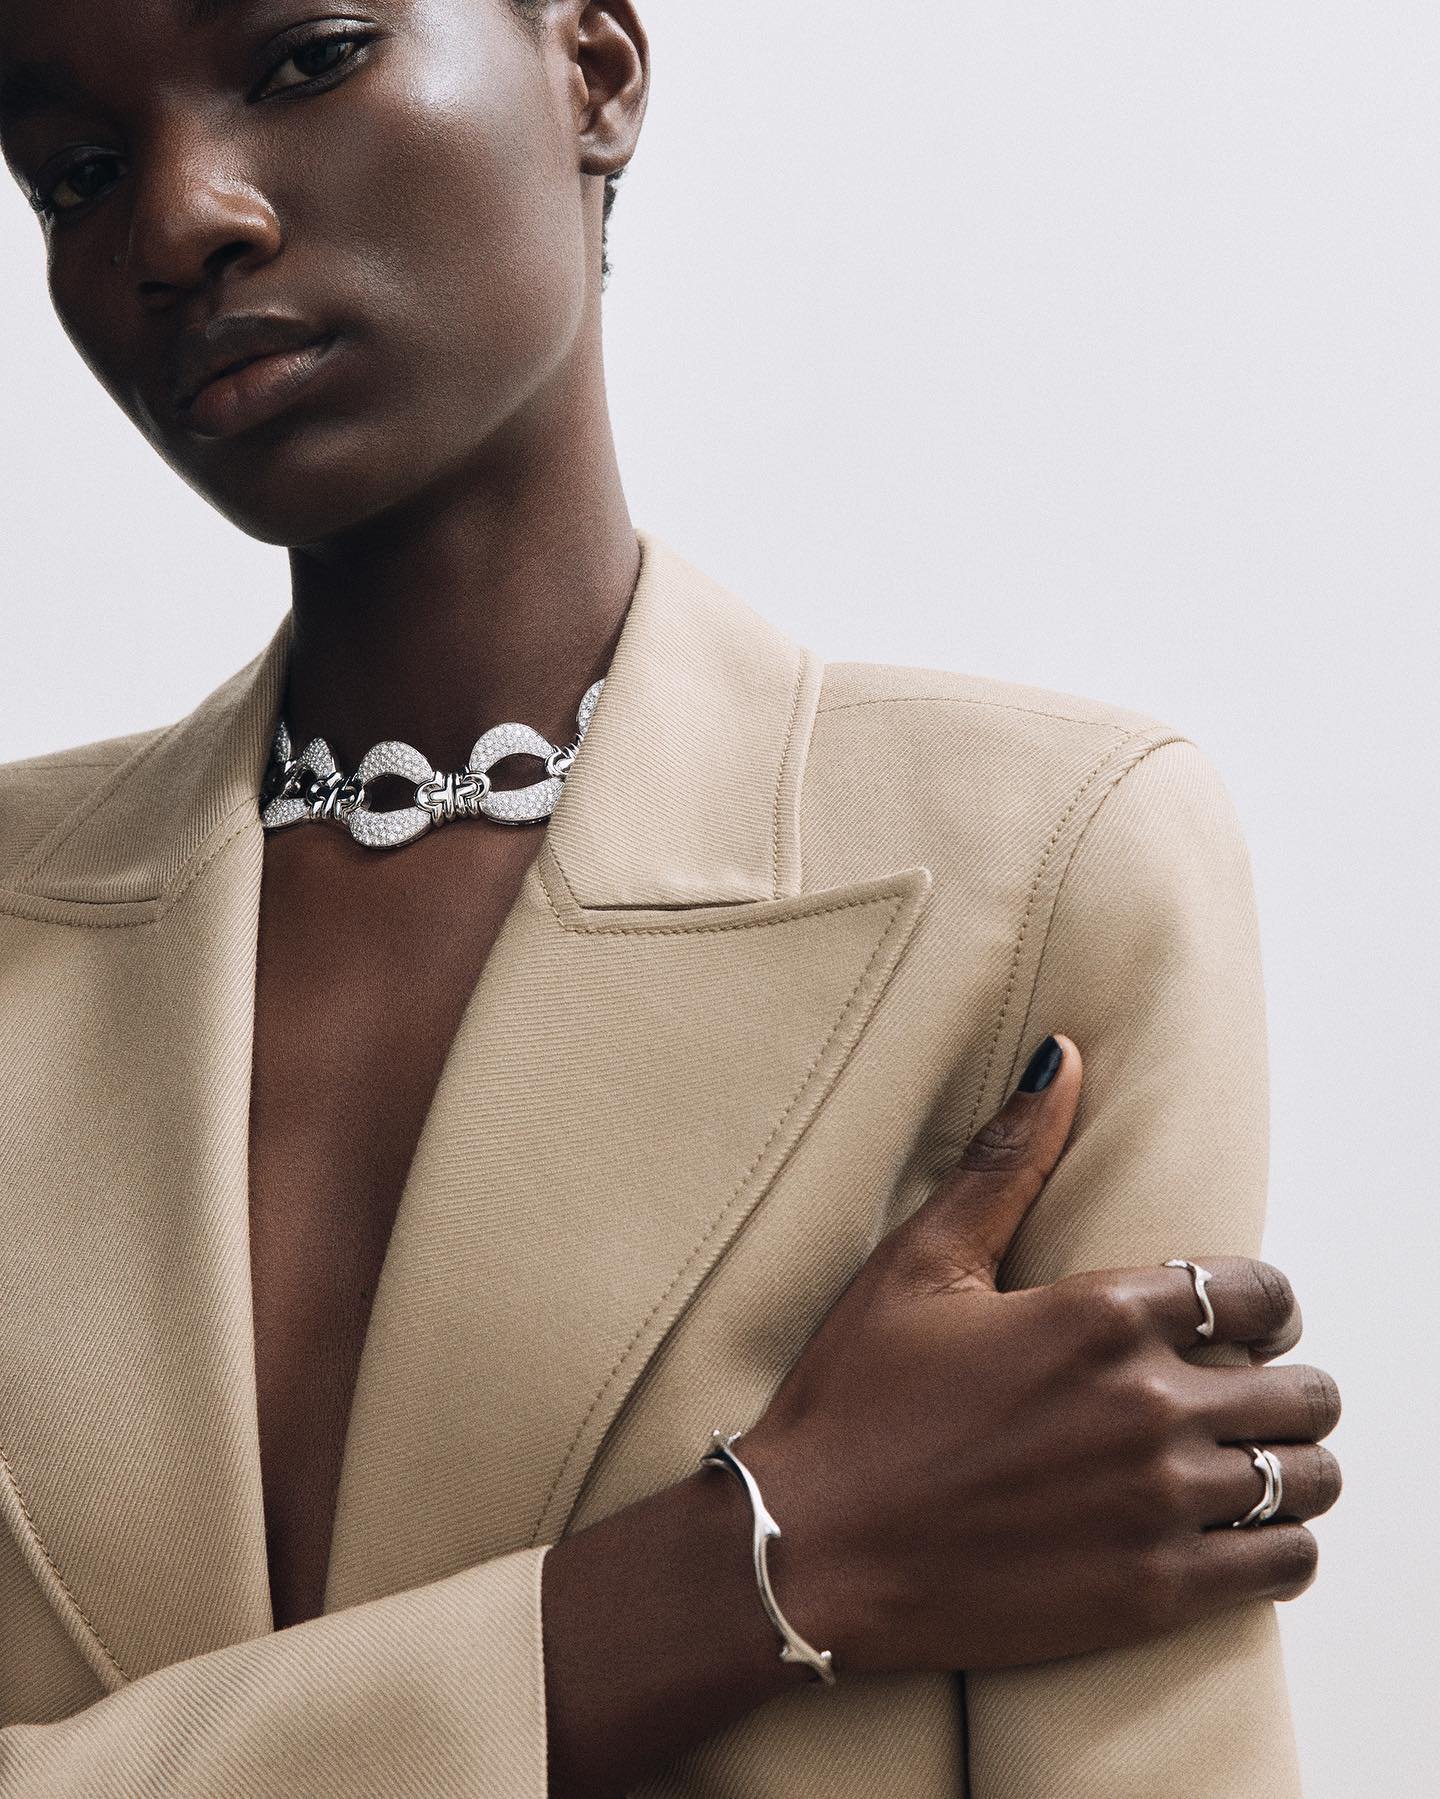 'Rock Steady' Modern Gold Jewelry Investments by Amie Milner — Anne of ...